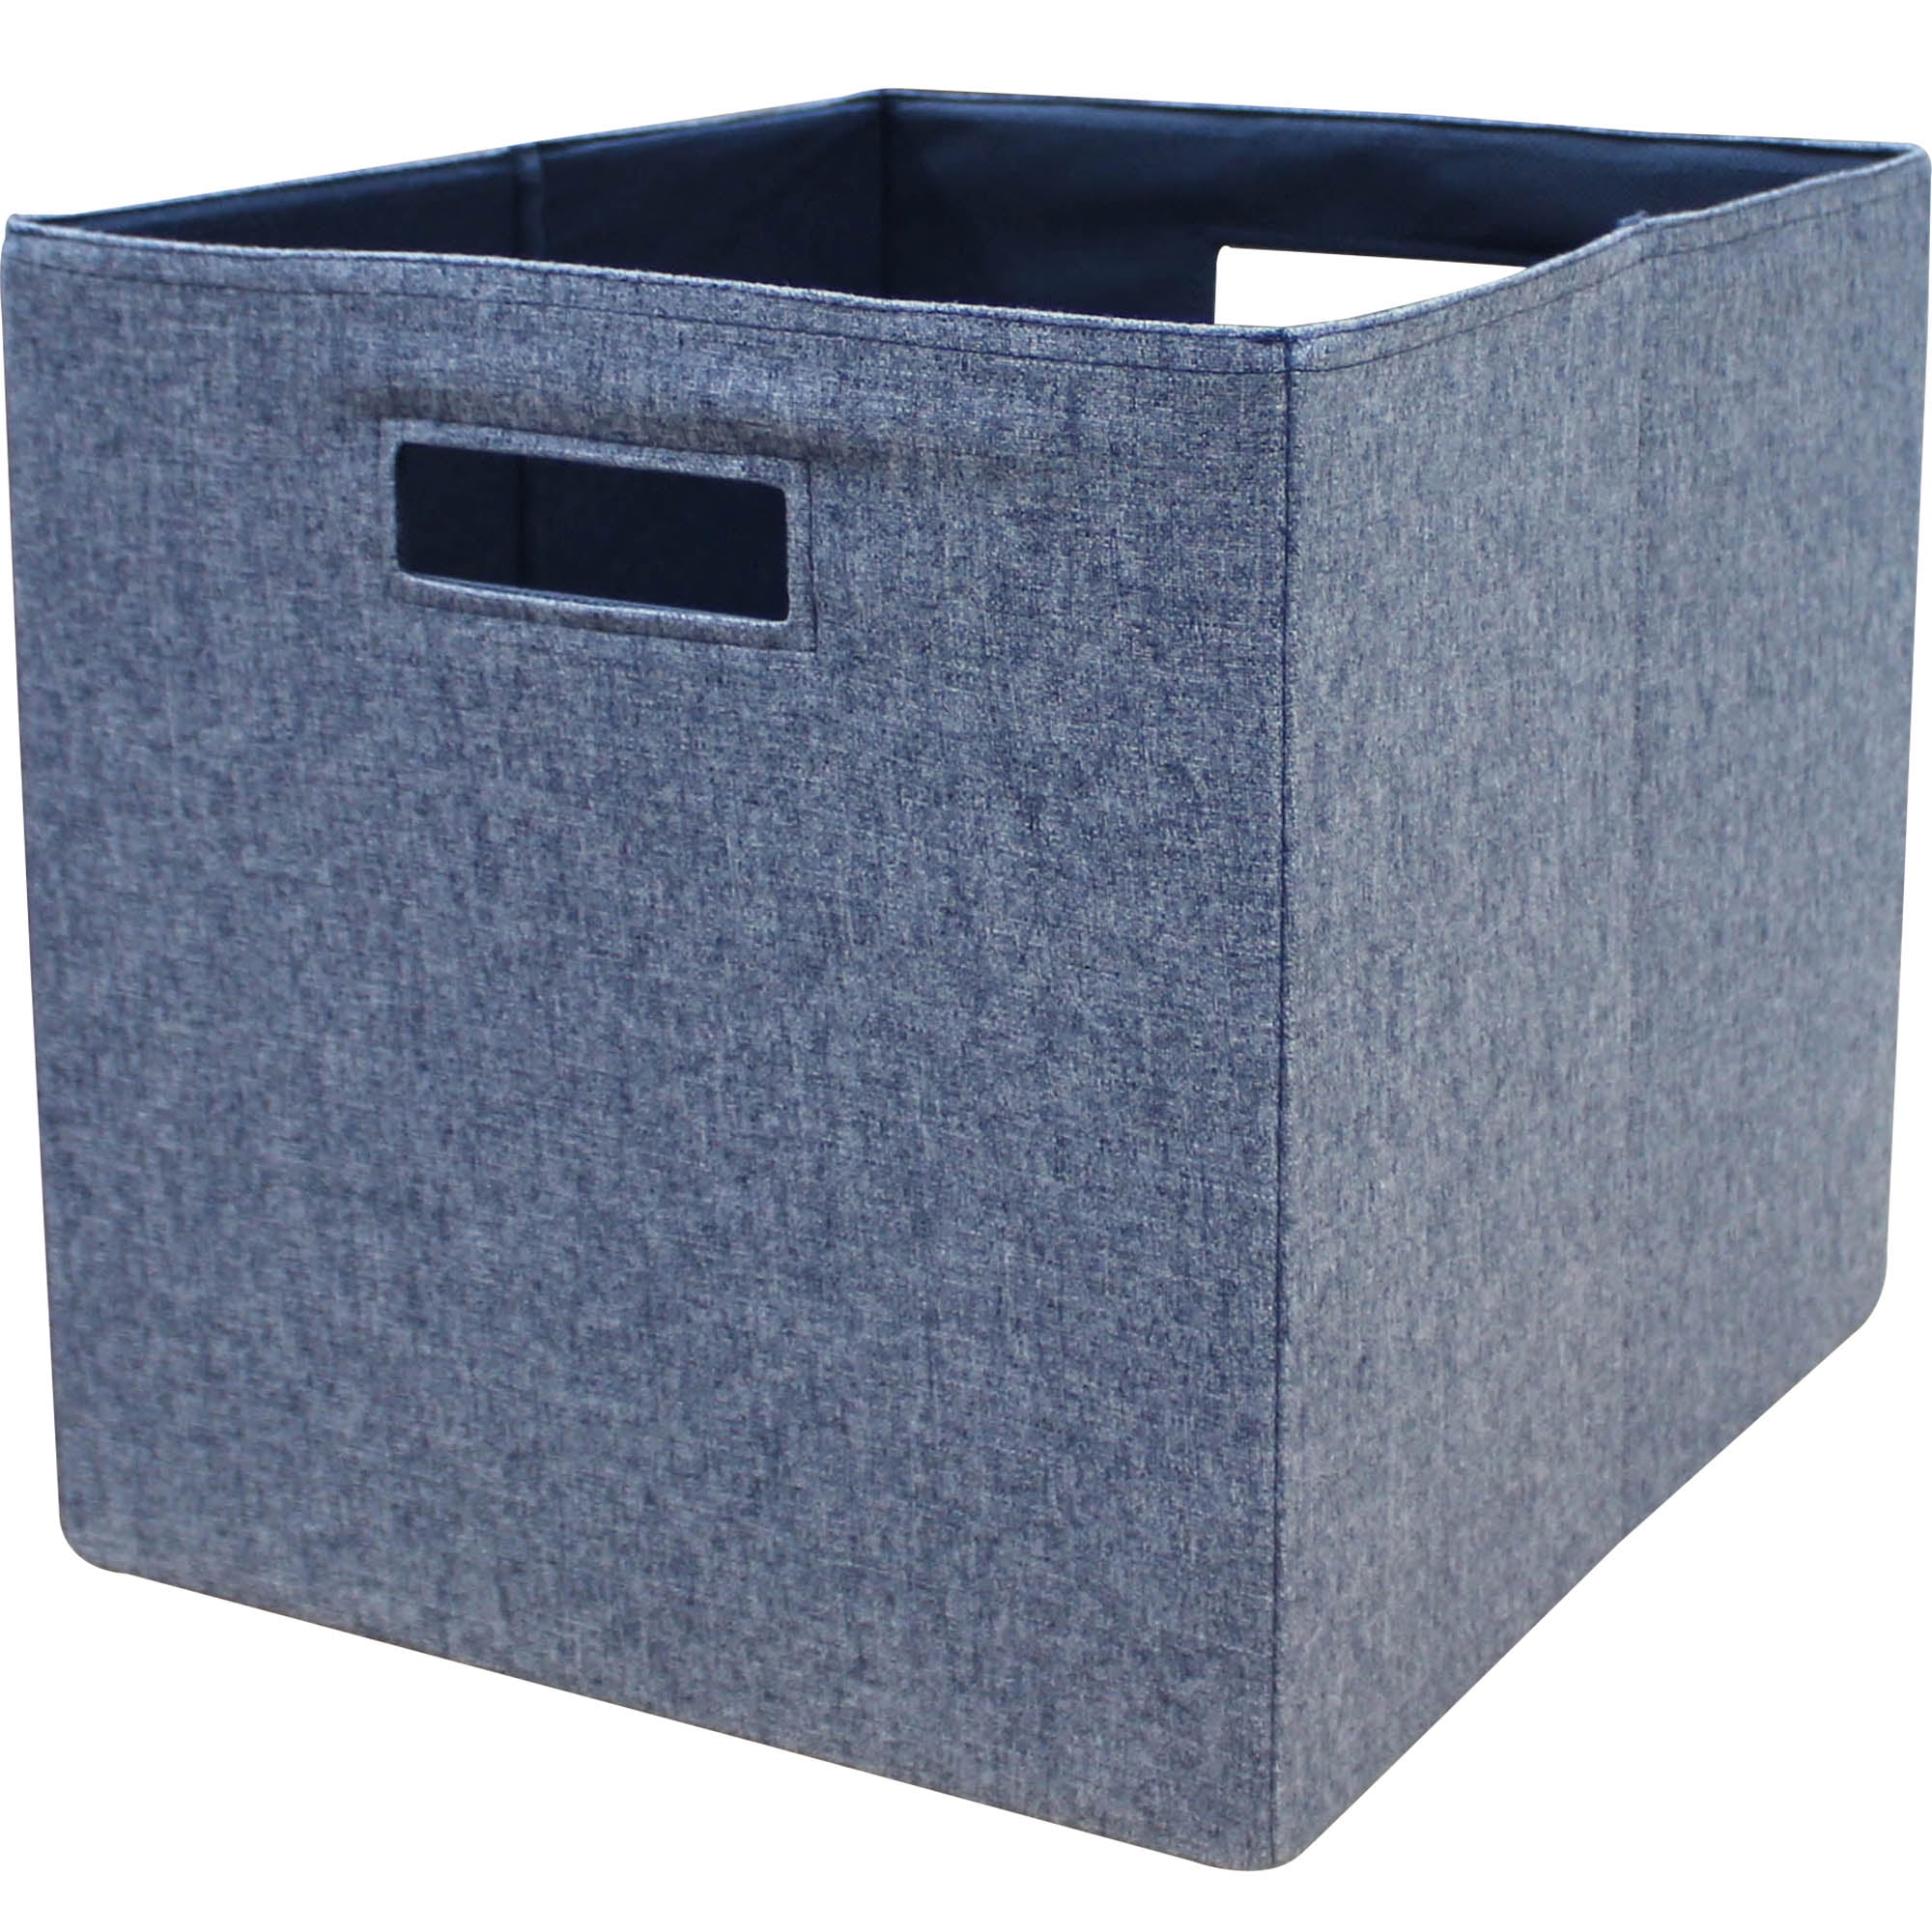 NEW LARGE Fabric Storage Bin CUBE HOME SPACE HARD SIDES 10.5" X 10.5" X 11" C24 